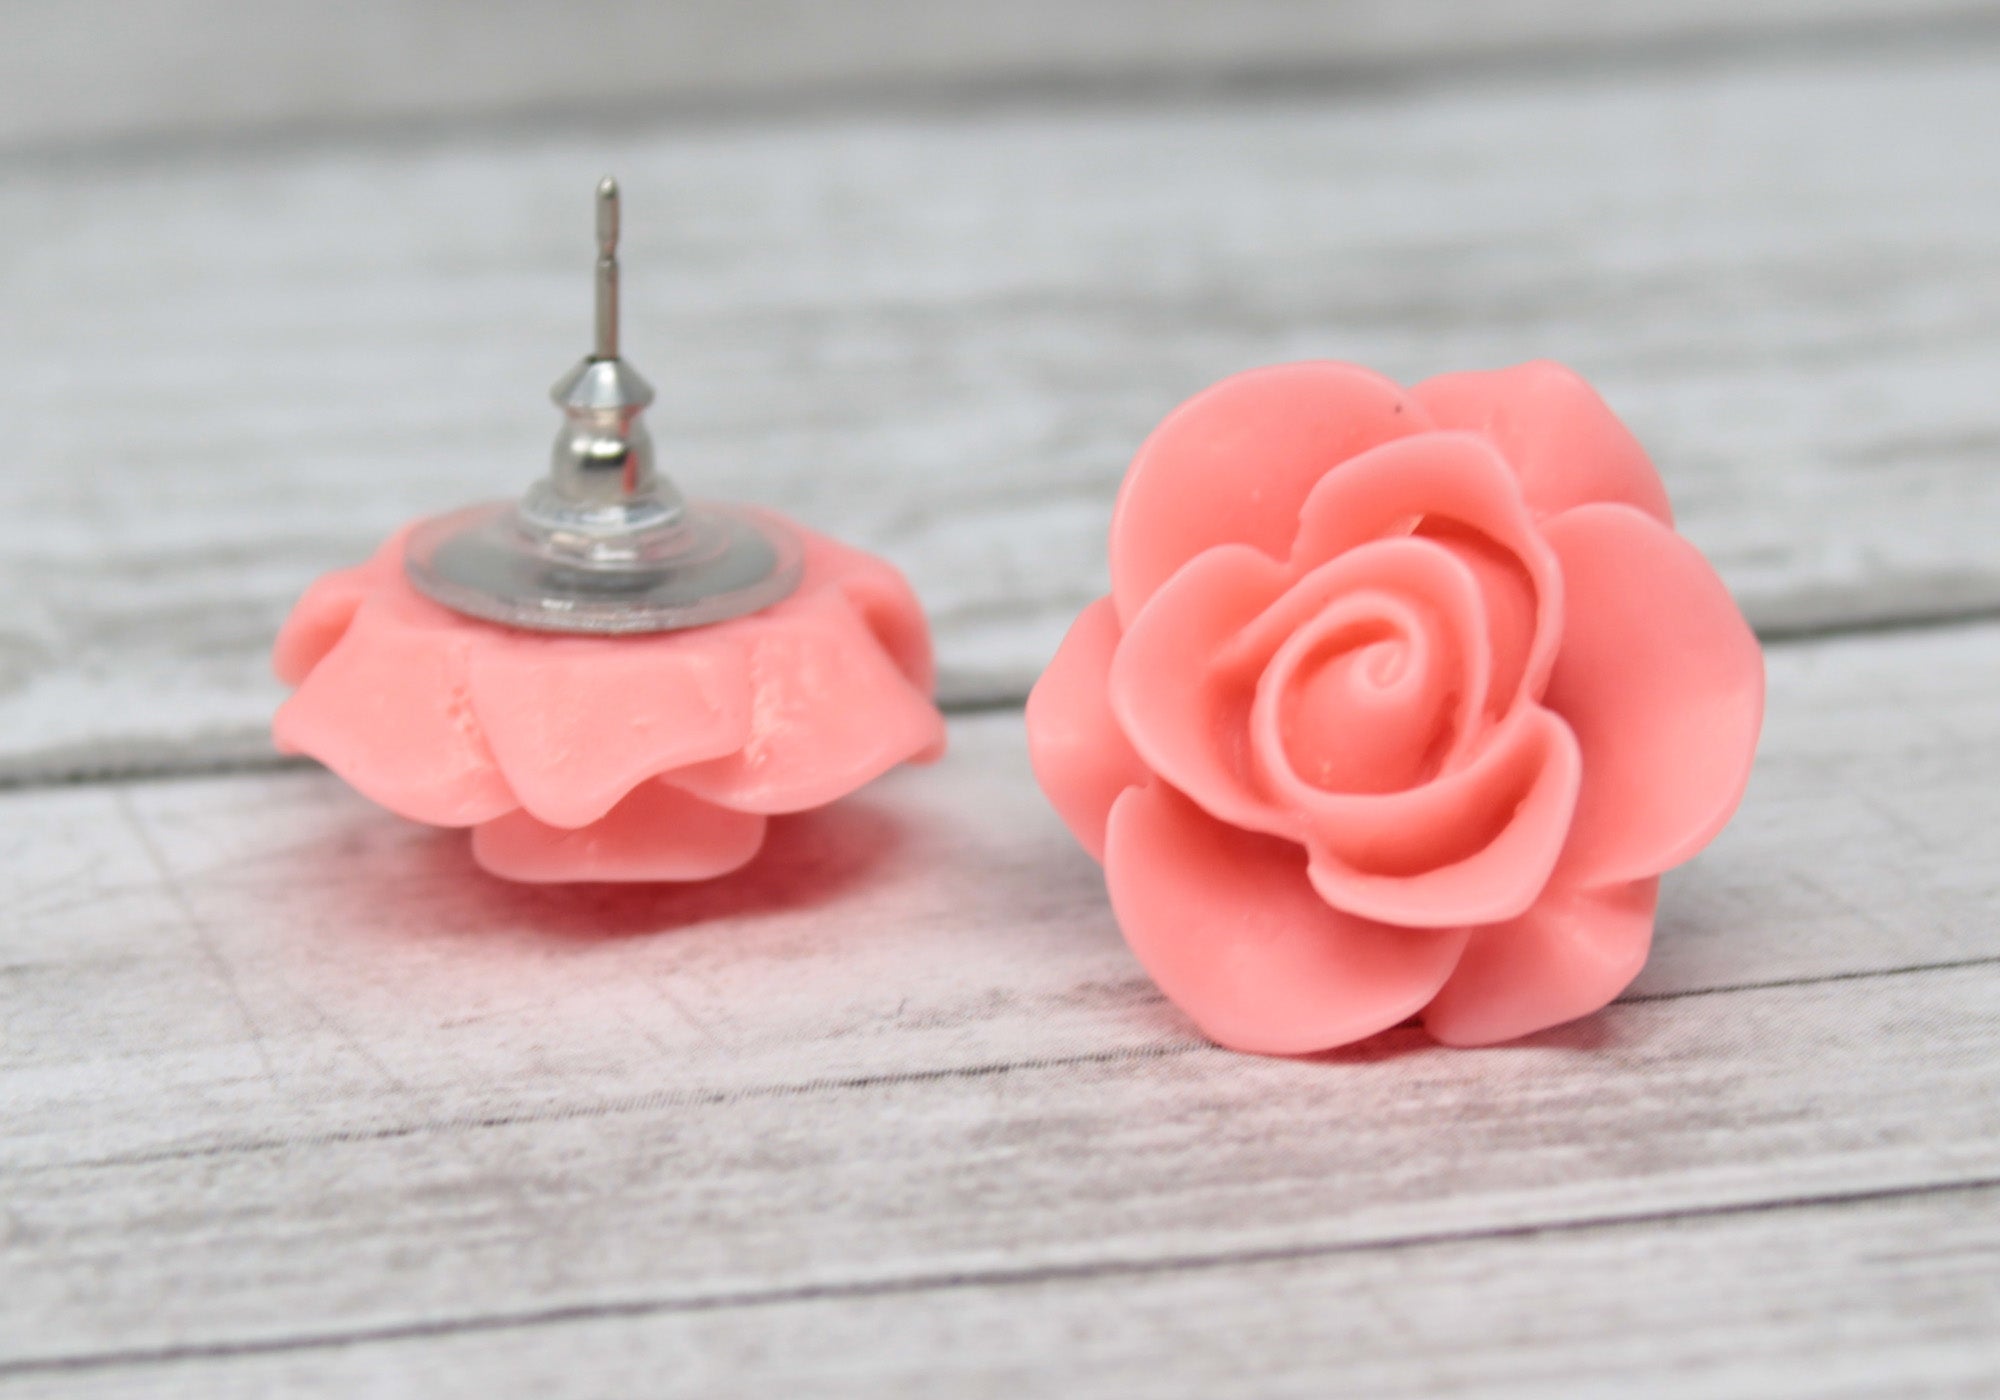 Large Single Bloom Studs in Matte Coral Rose